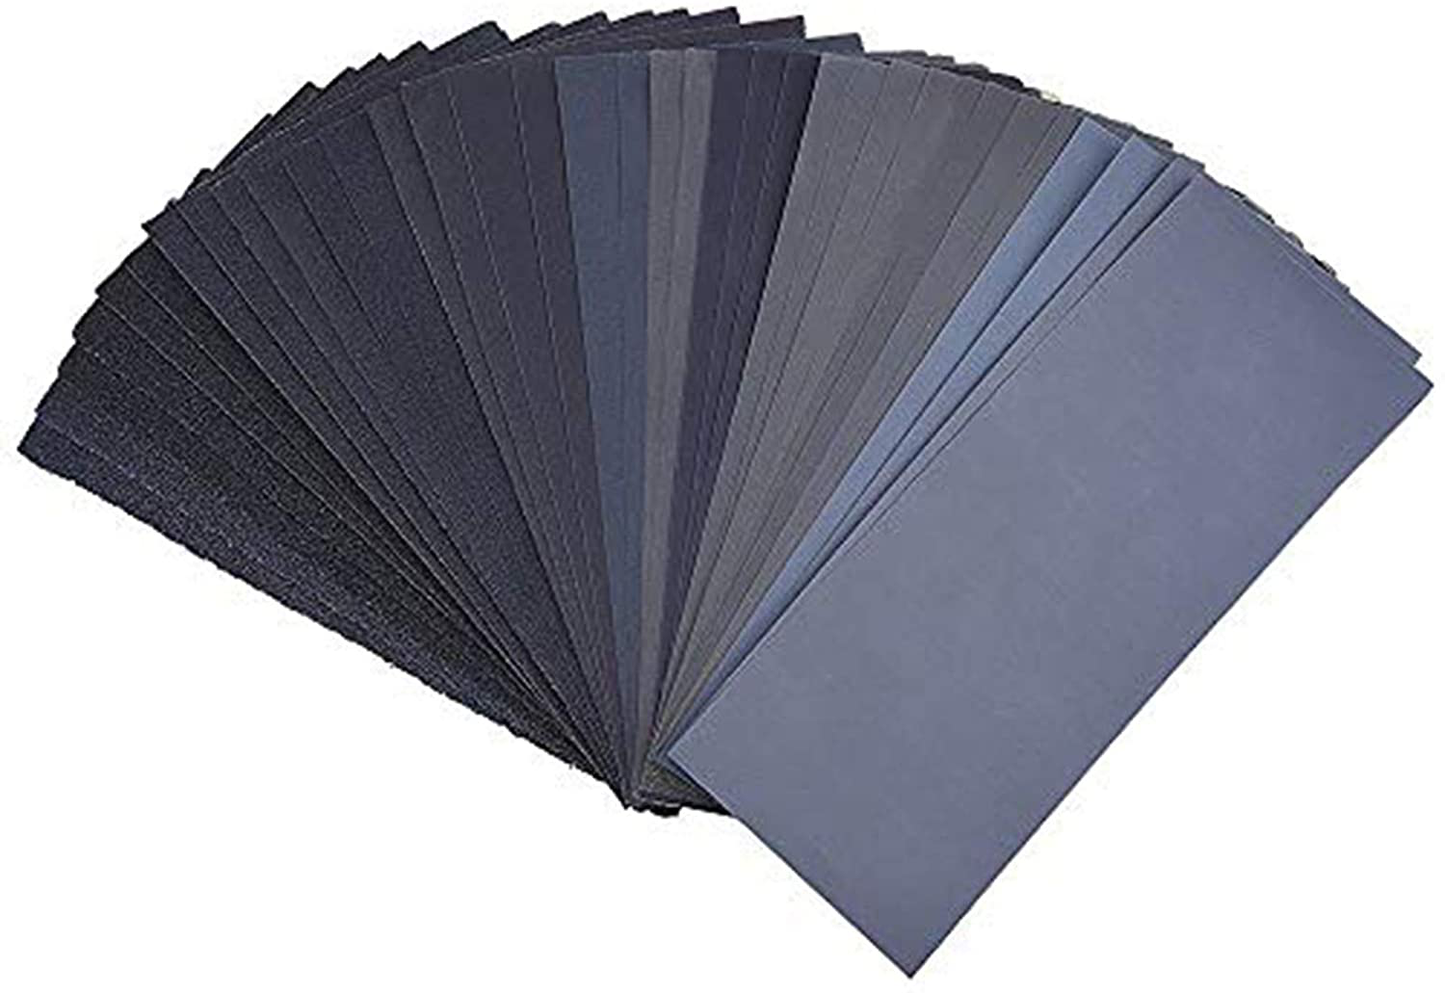 120 To 3000 Assorted Grit Sandpaper for Wood Furniture Finishing, Metal Sanding and Automotive Polishing, Dry or Wet Sanding